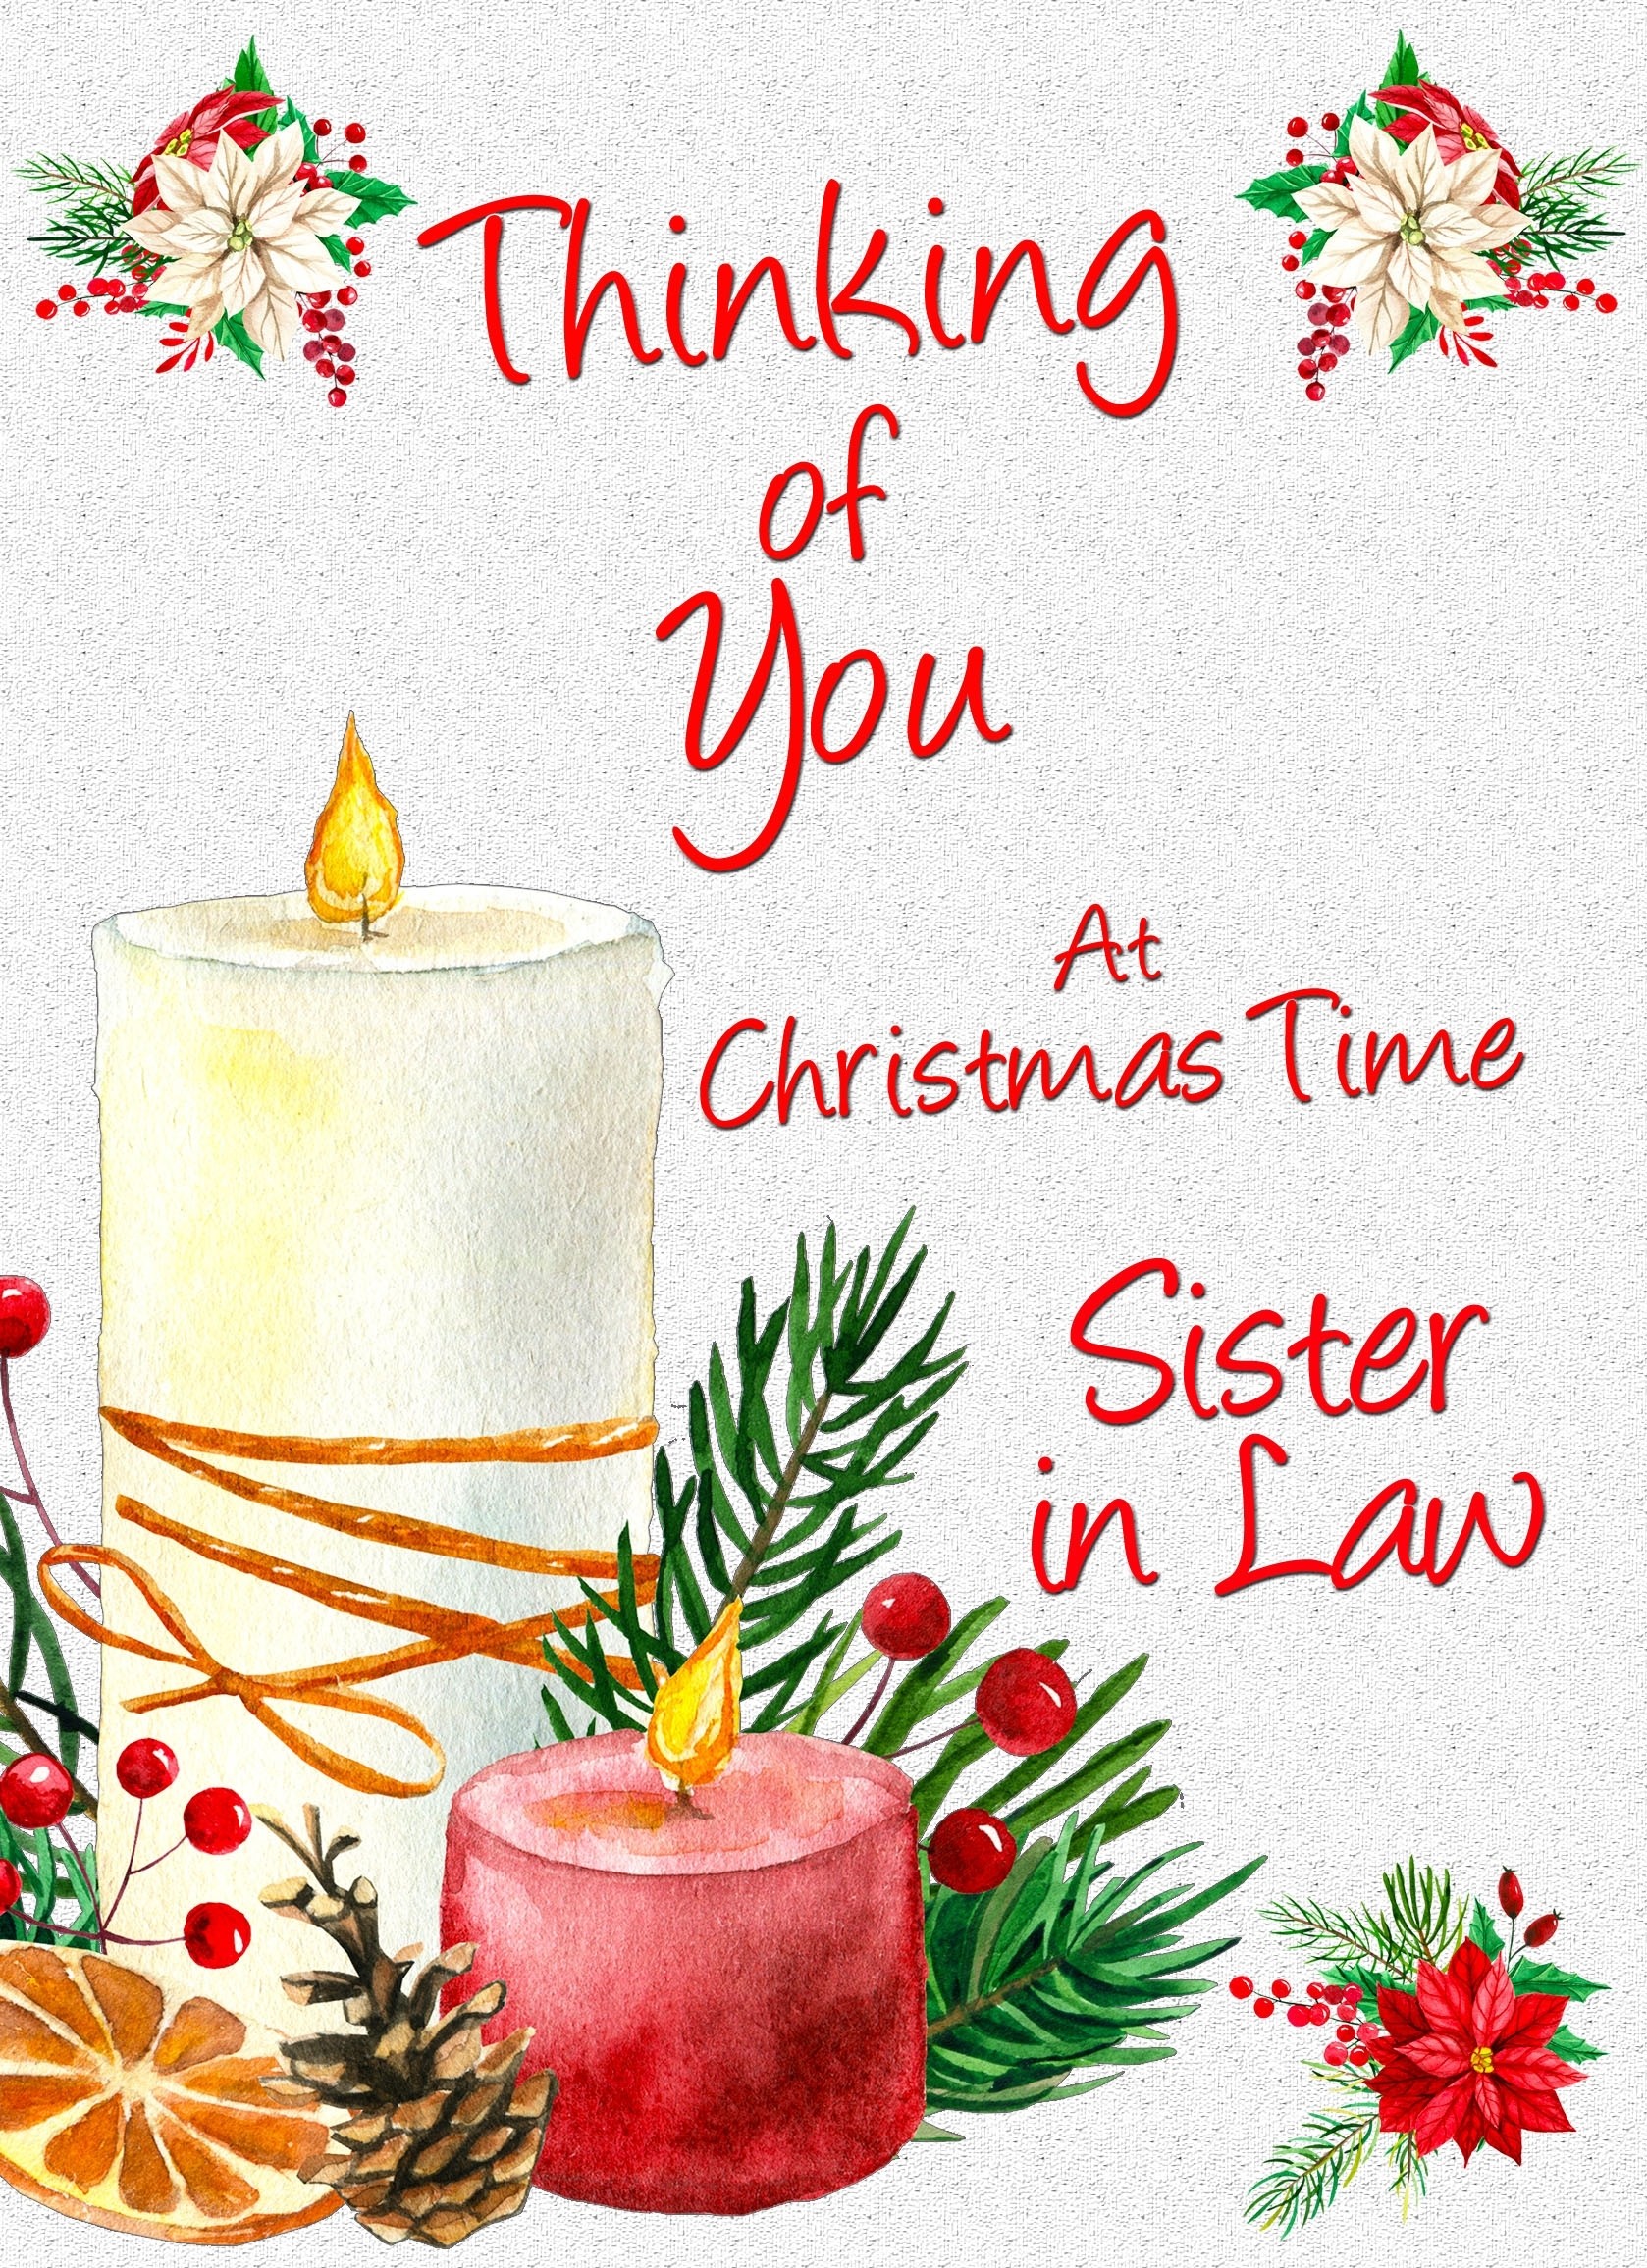 Thinking of You at Christmas Card For Sister in Law (Candle)